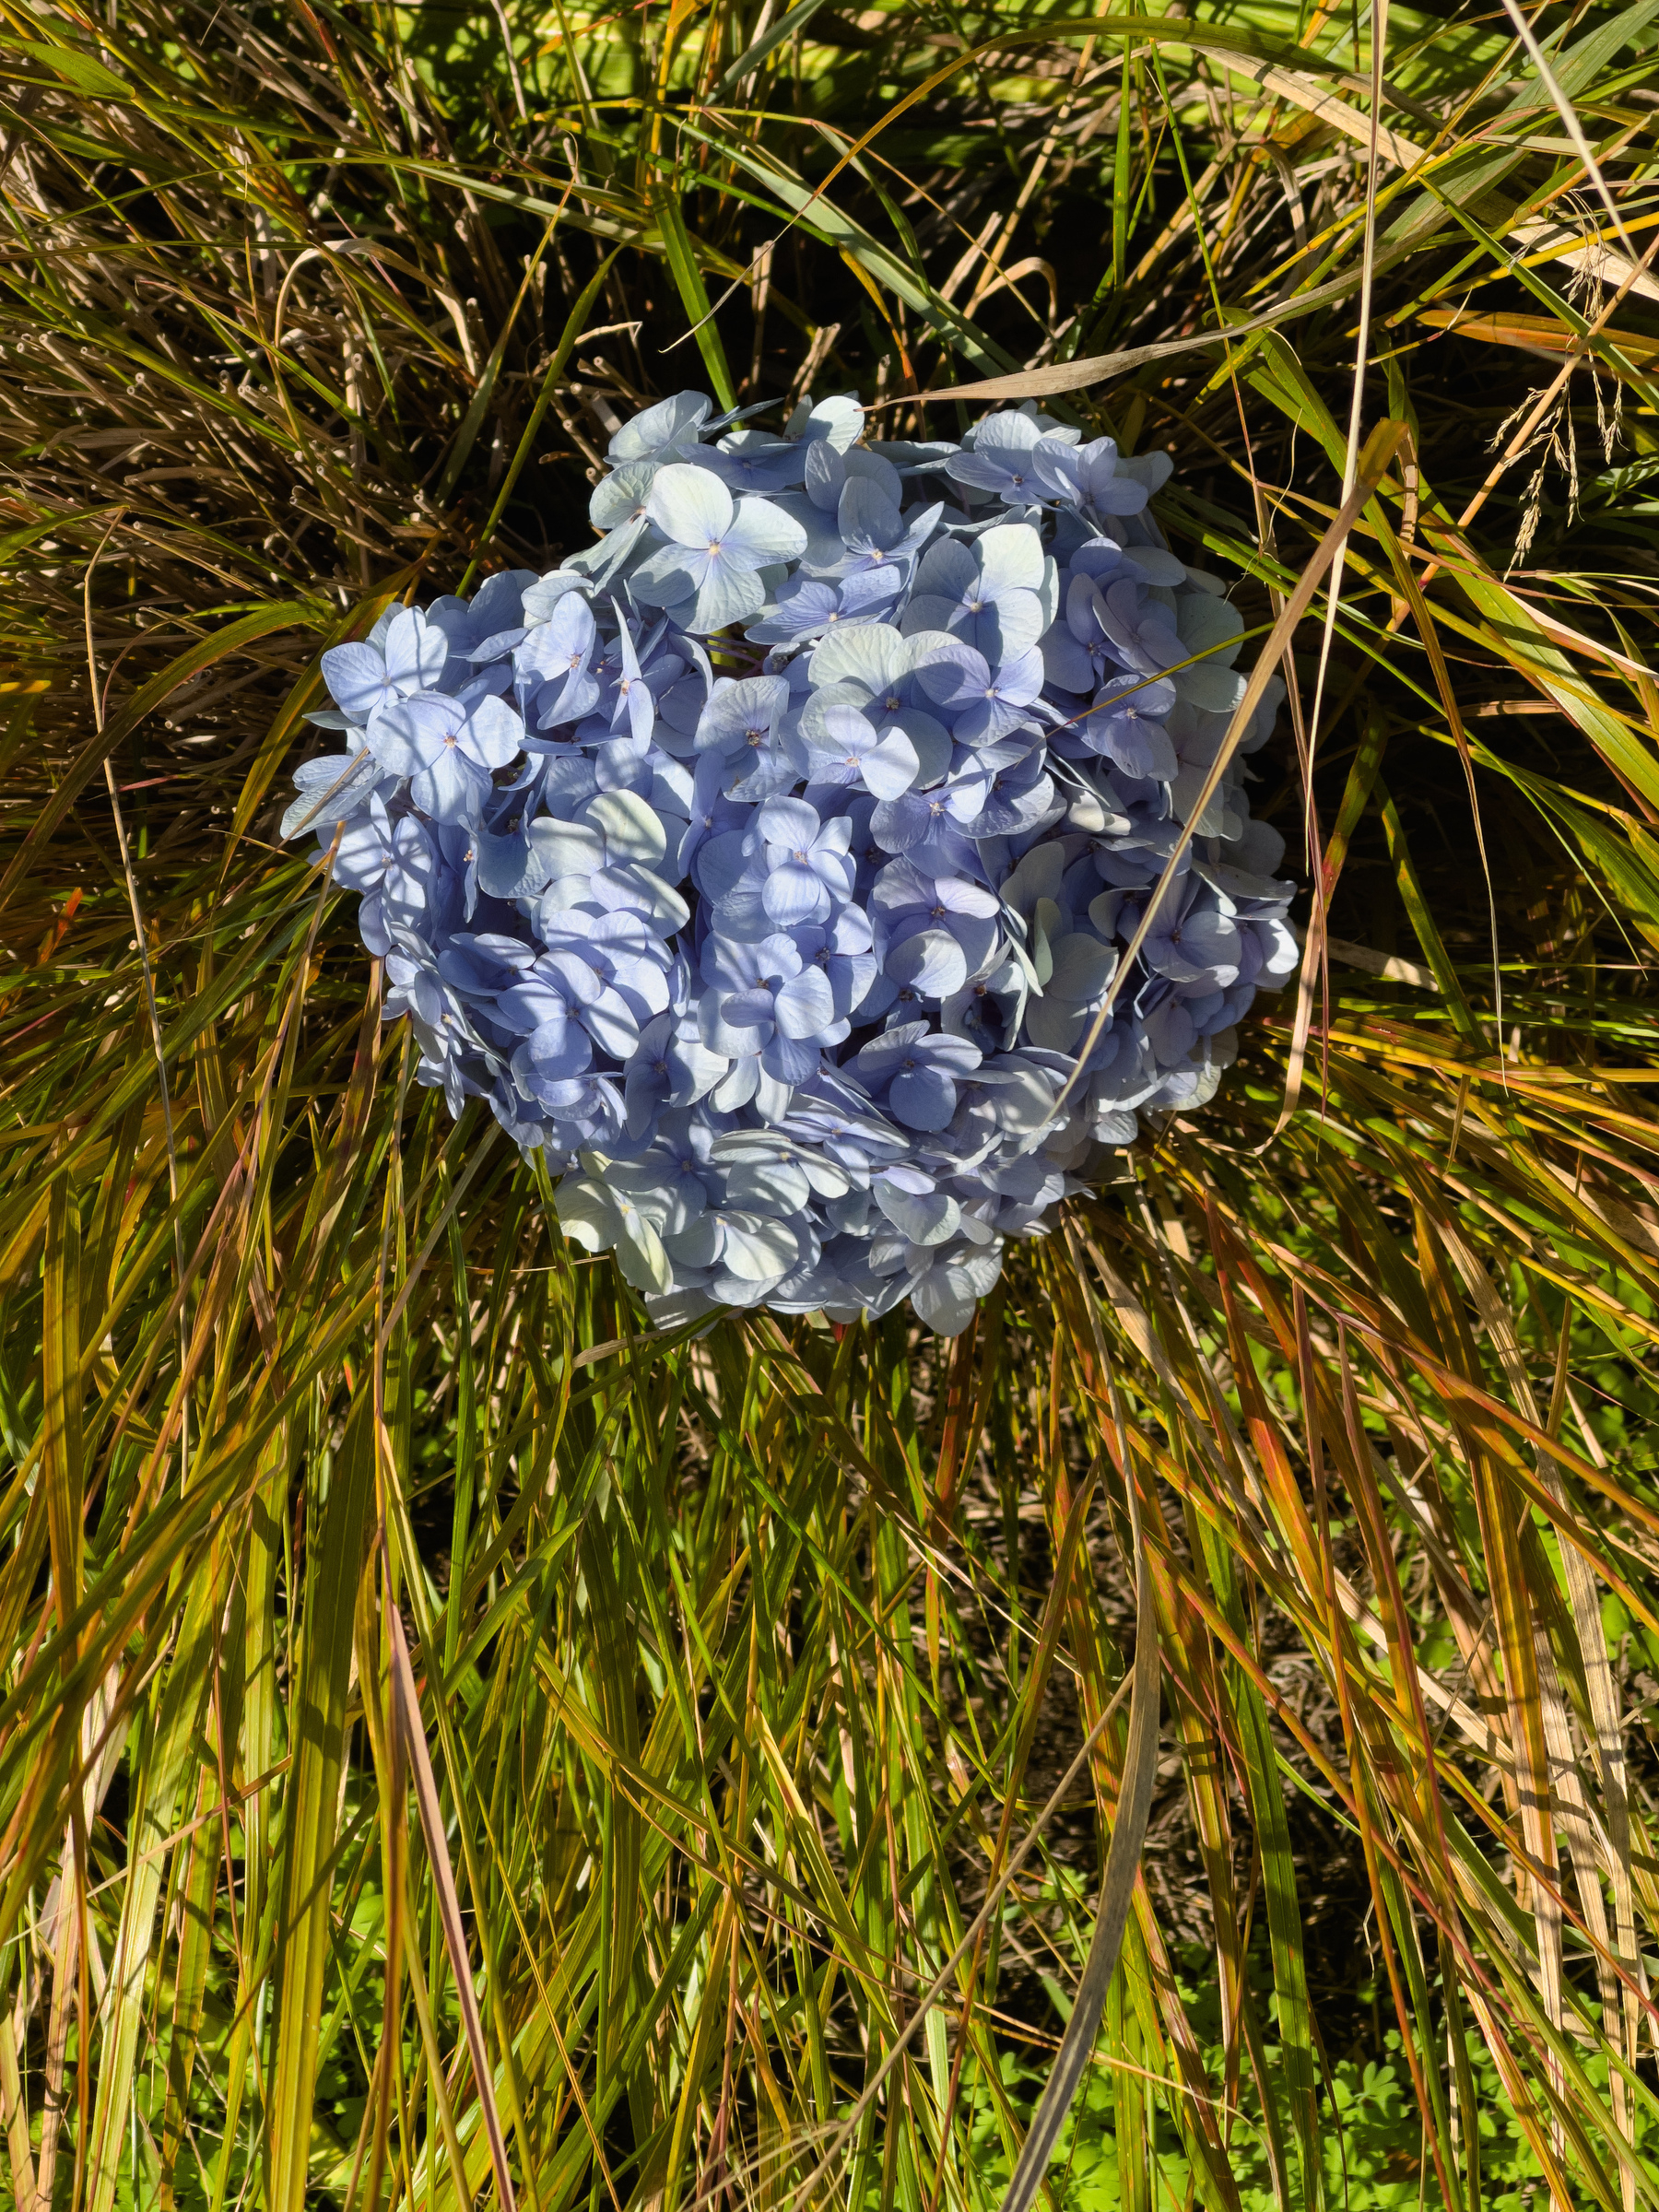 Single hydrangea bloom head in the midst of tall grass.